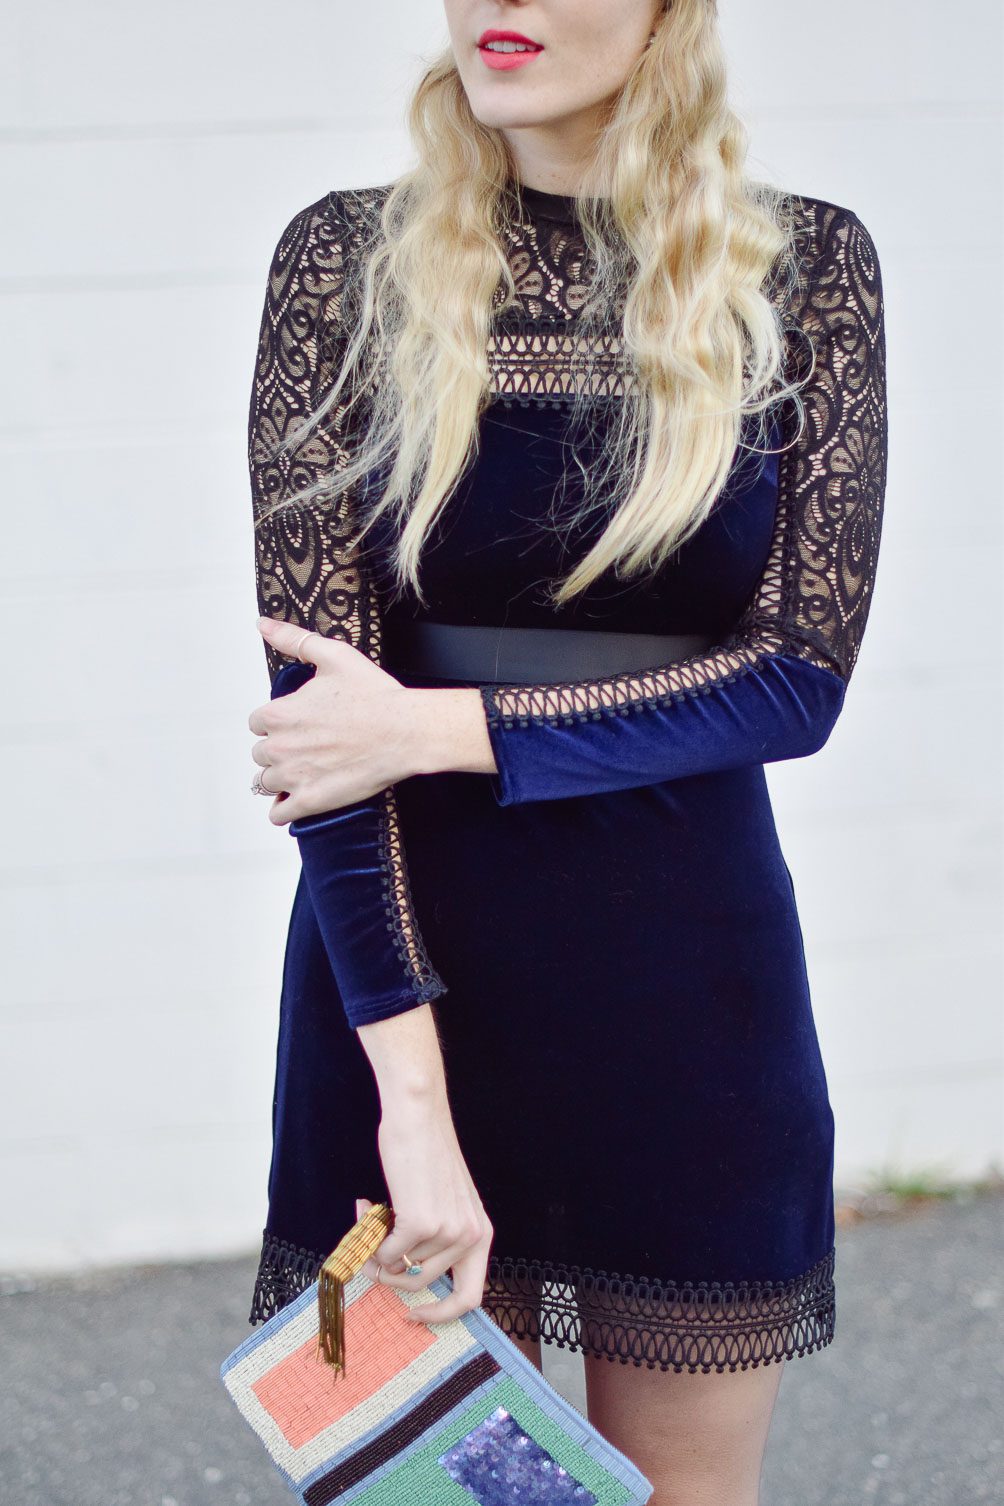 wearing a blue velvet lace mini dress with beaded clutch and patent leather heels